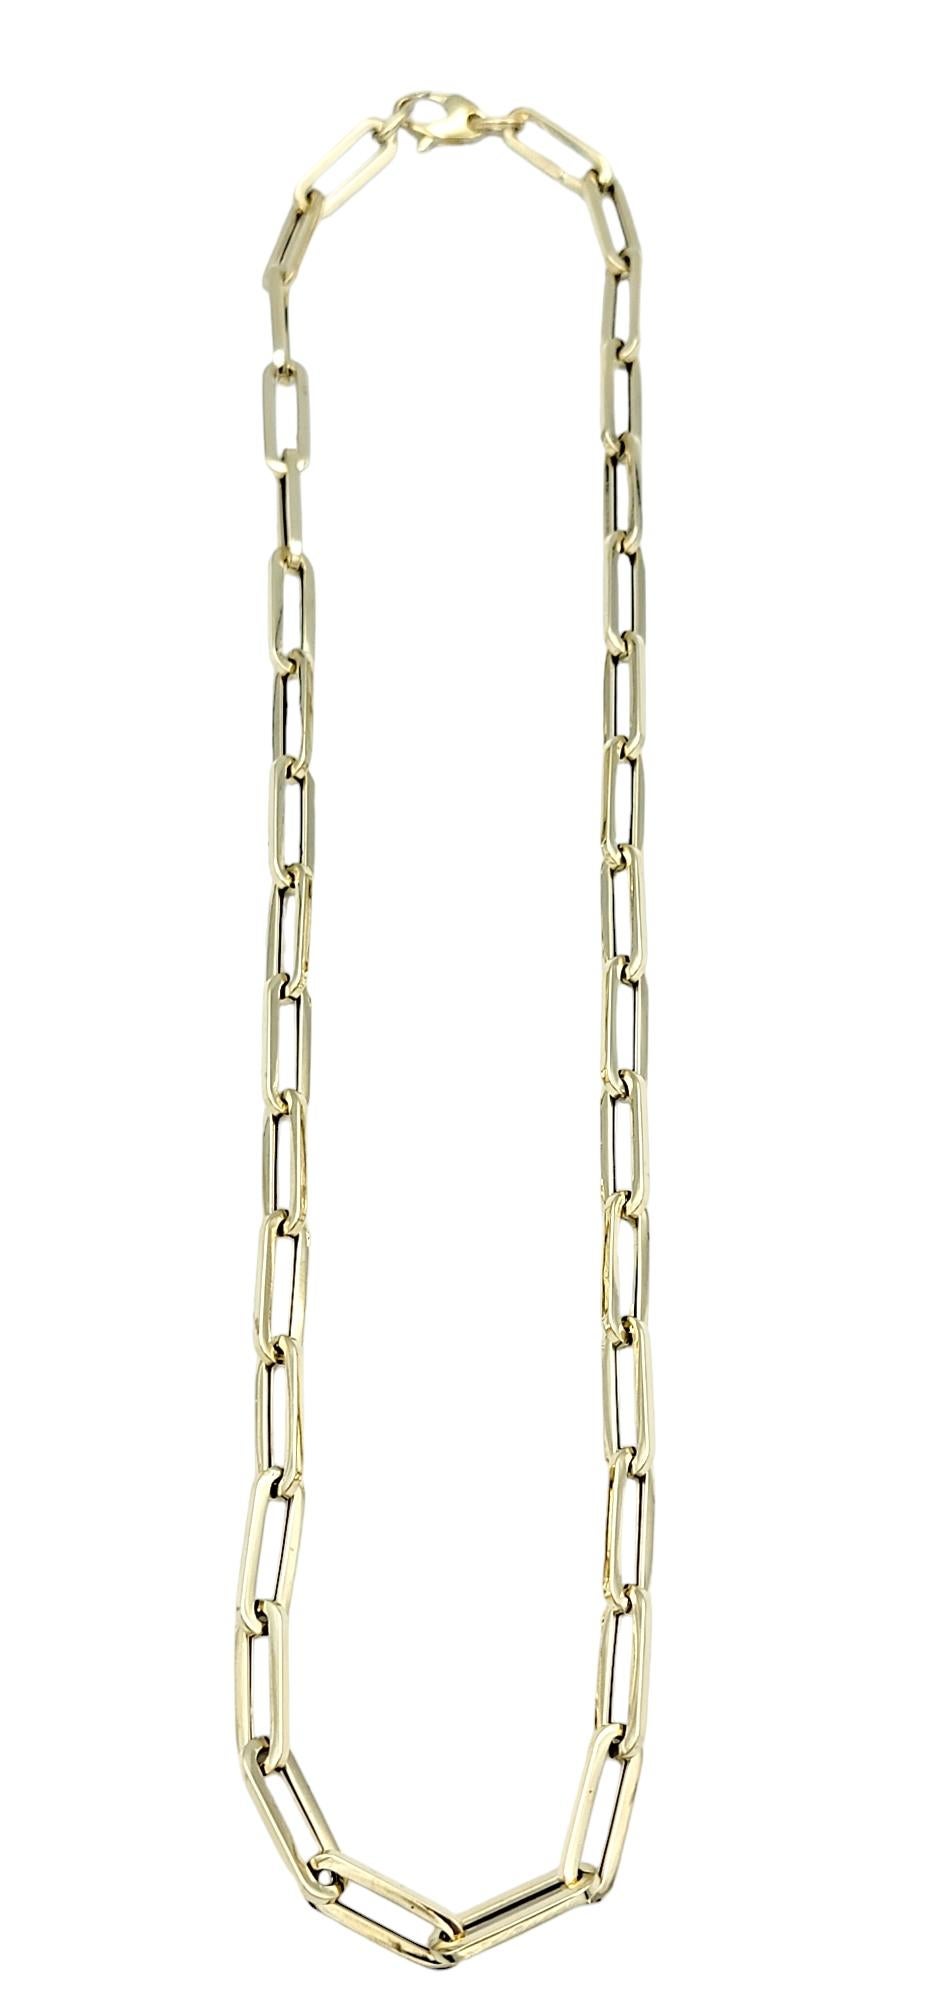 Contemporary Elongated Paperclip Link Necklace in Polished 14 Karat Yellow Gold, 18